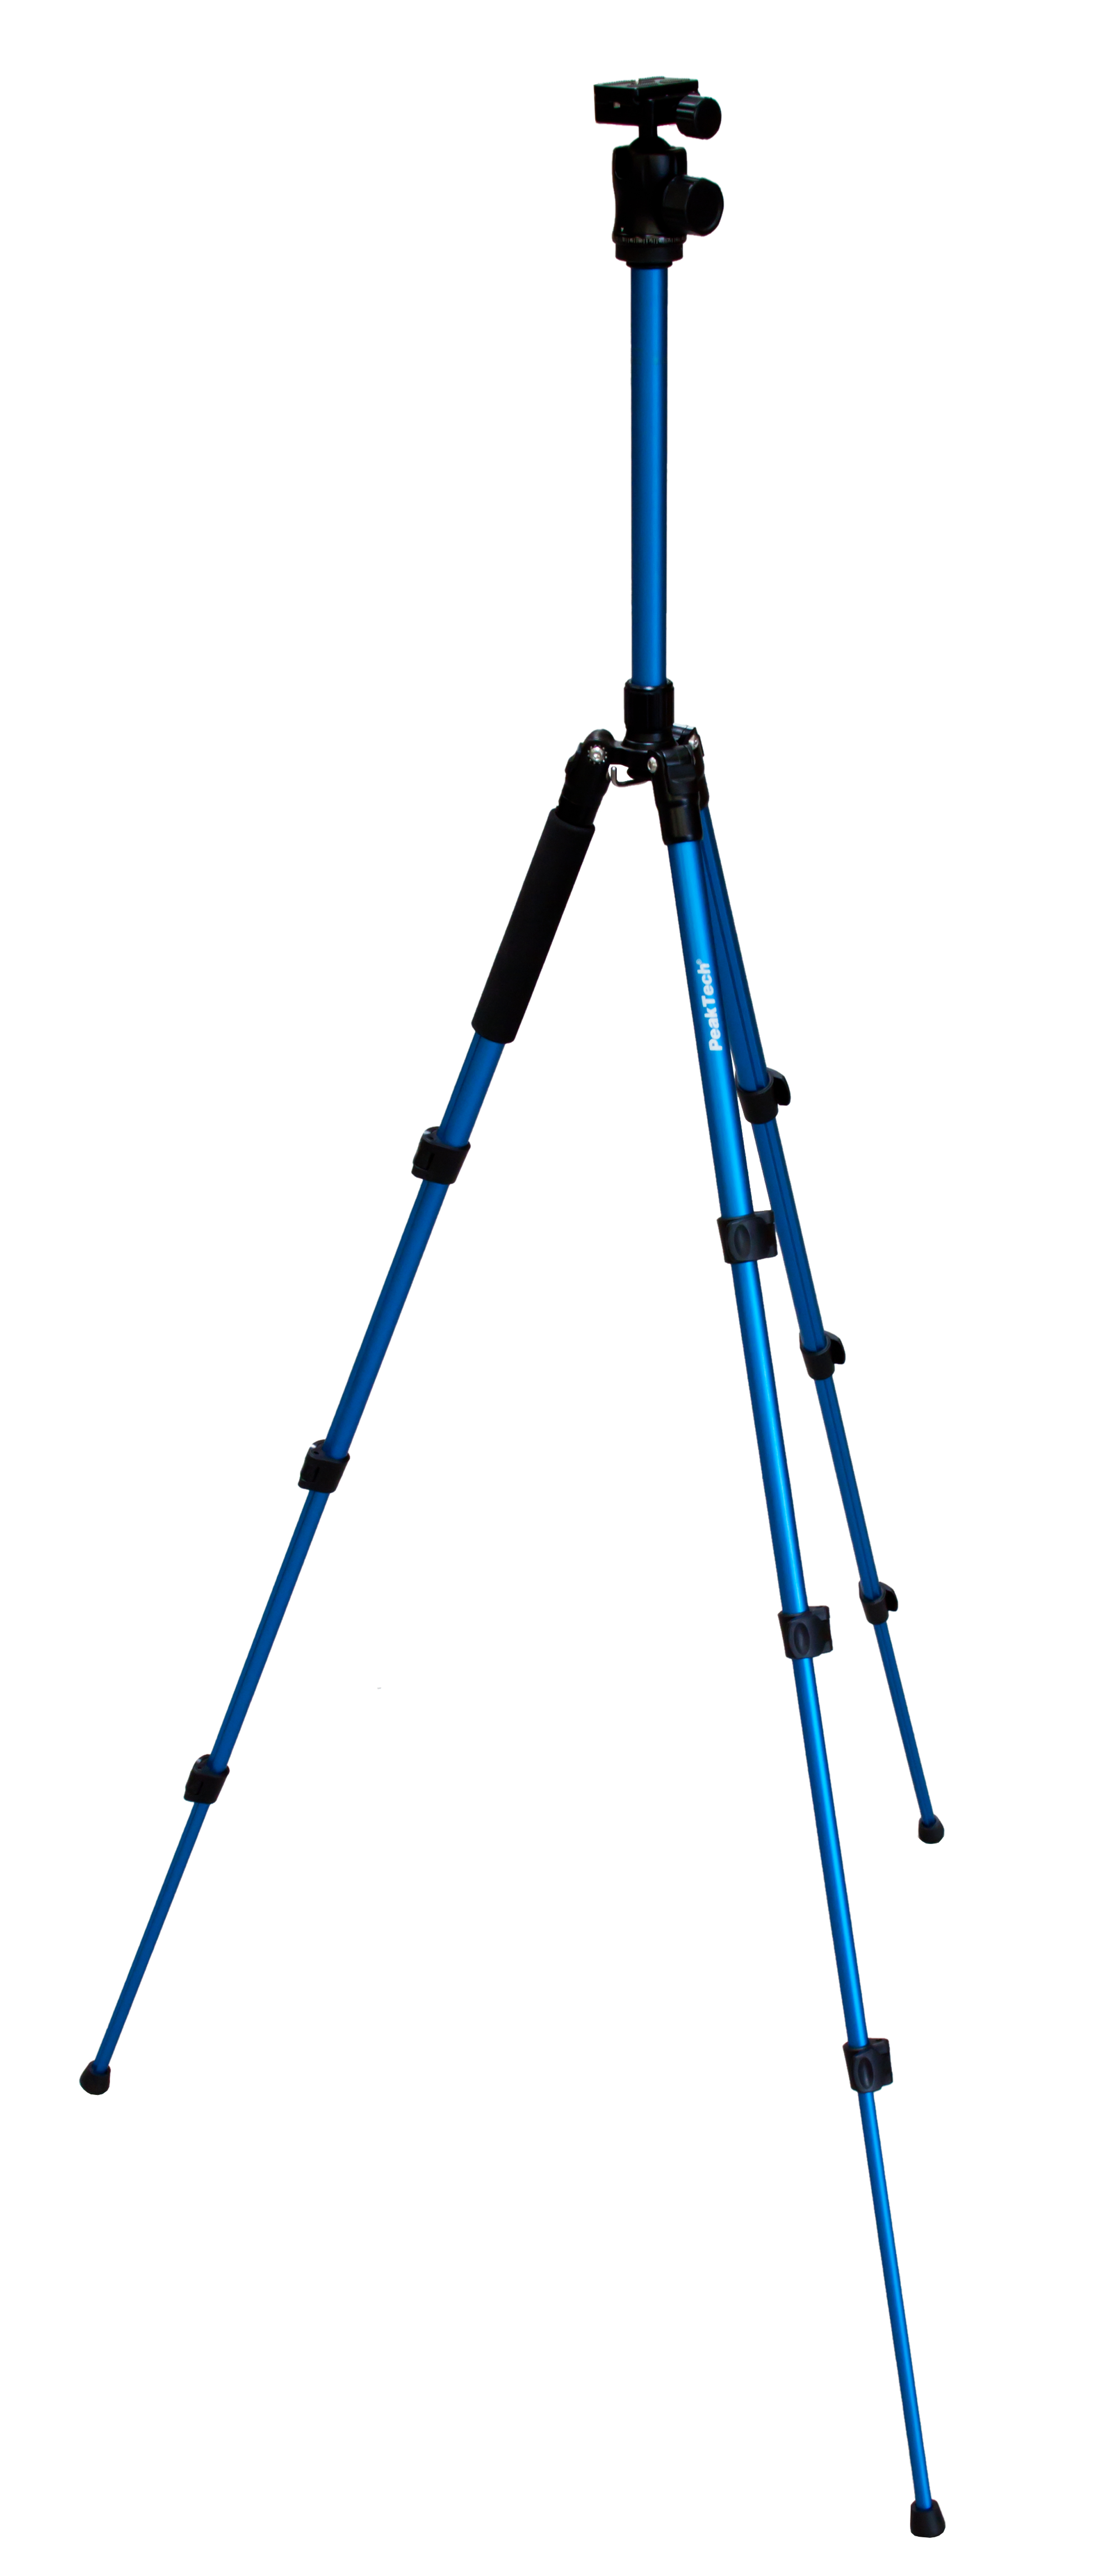 «PeakTech® P 7851» Tripod for cameras and measurement devices